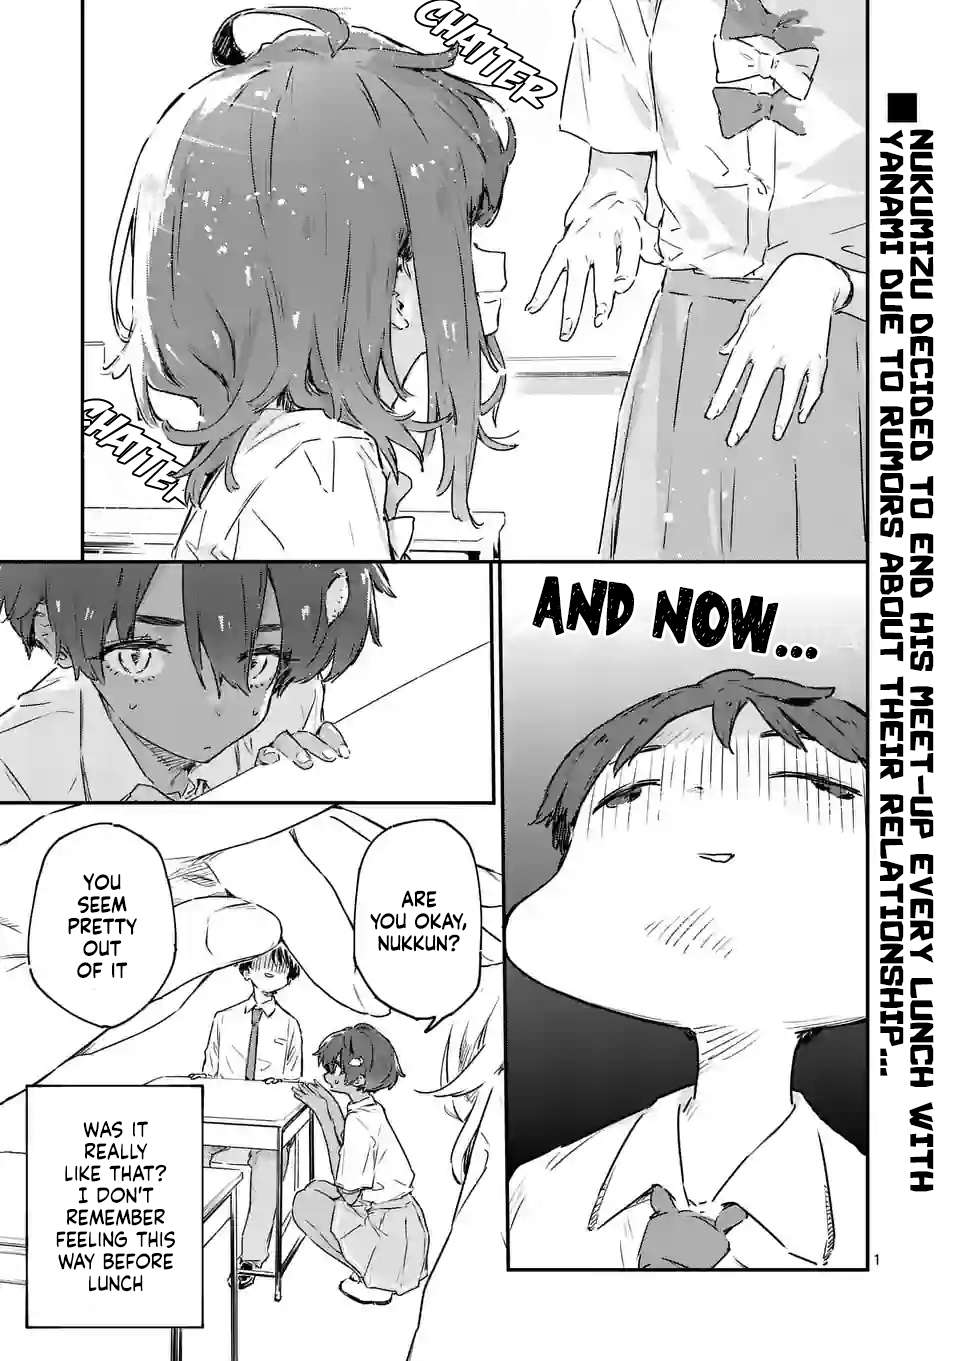 Too Many Losing Heroines - chapter 13 - #1